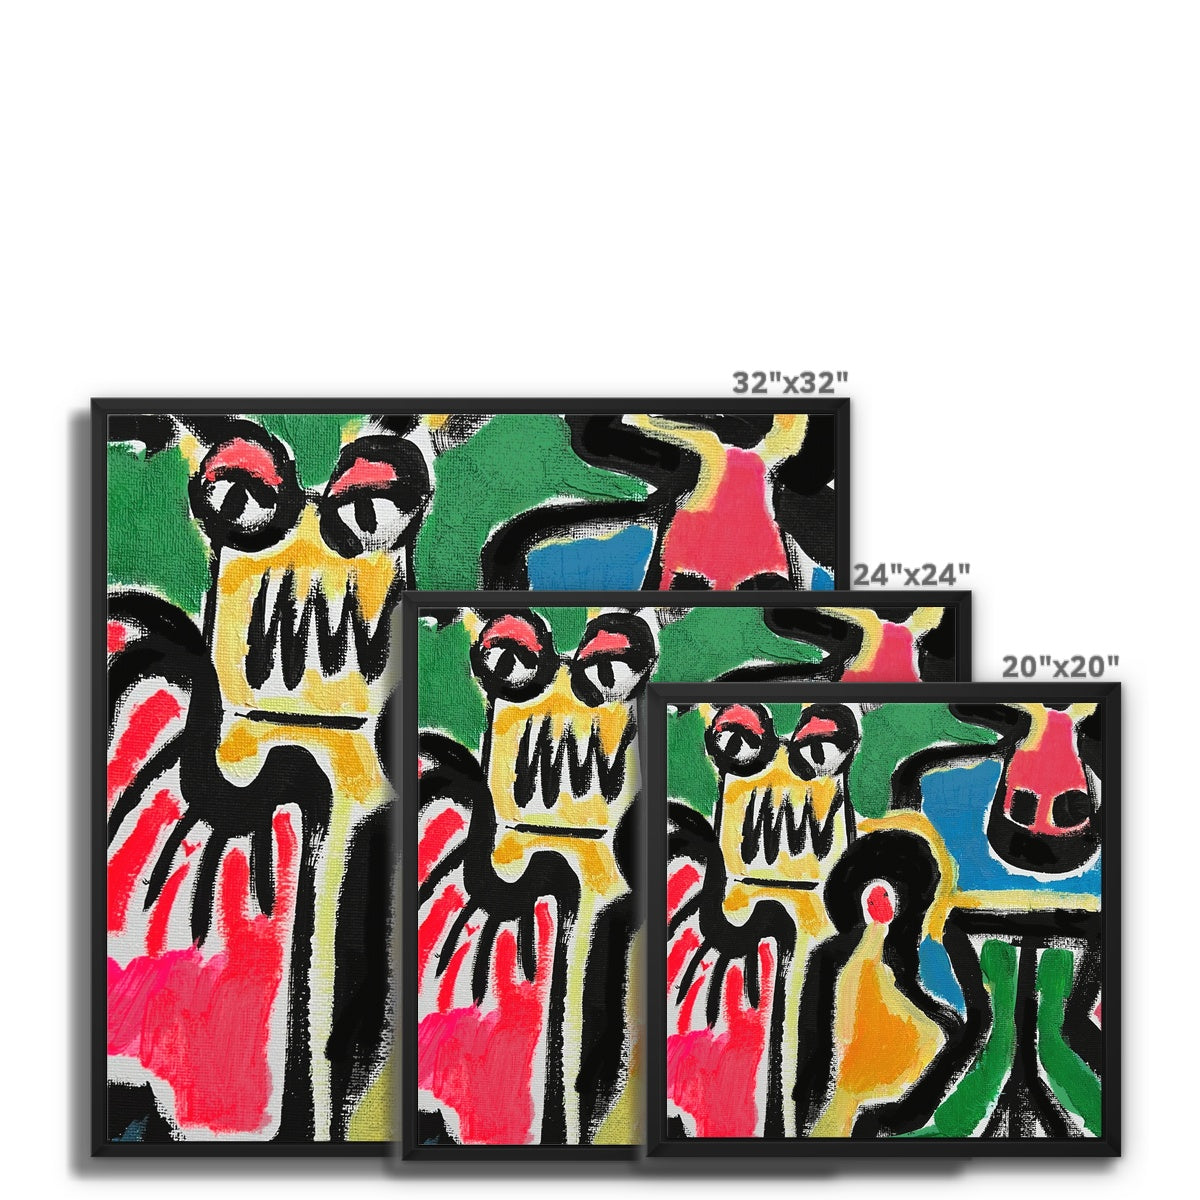 Three framed canvas prints on a white background, showing naïve style abstract artwork in sizes 32 x 32 inches, 24 x 24 inches and 20 x 20 inches square. colourful outsider art, abstract style featuring naïve faces, in a thin black wooden square frame.